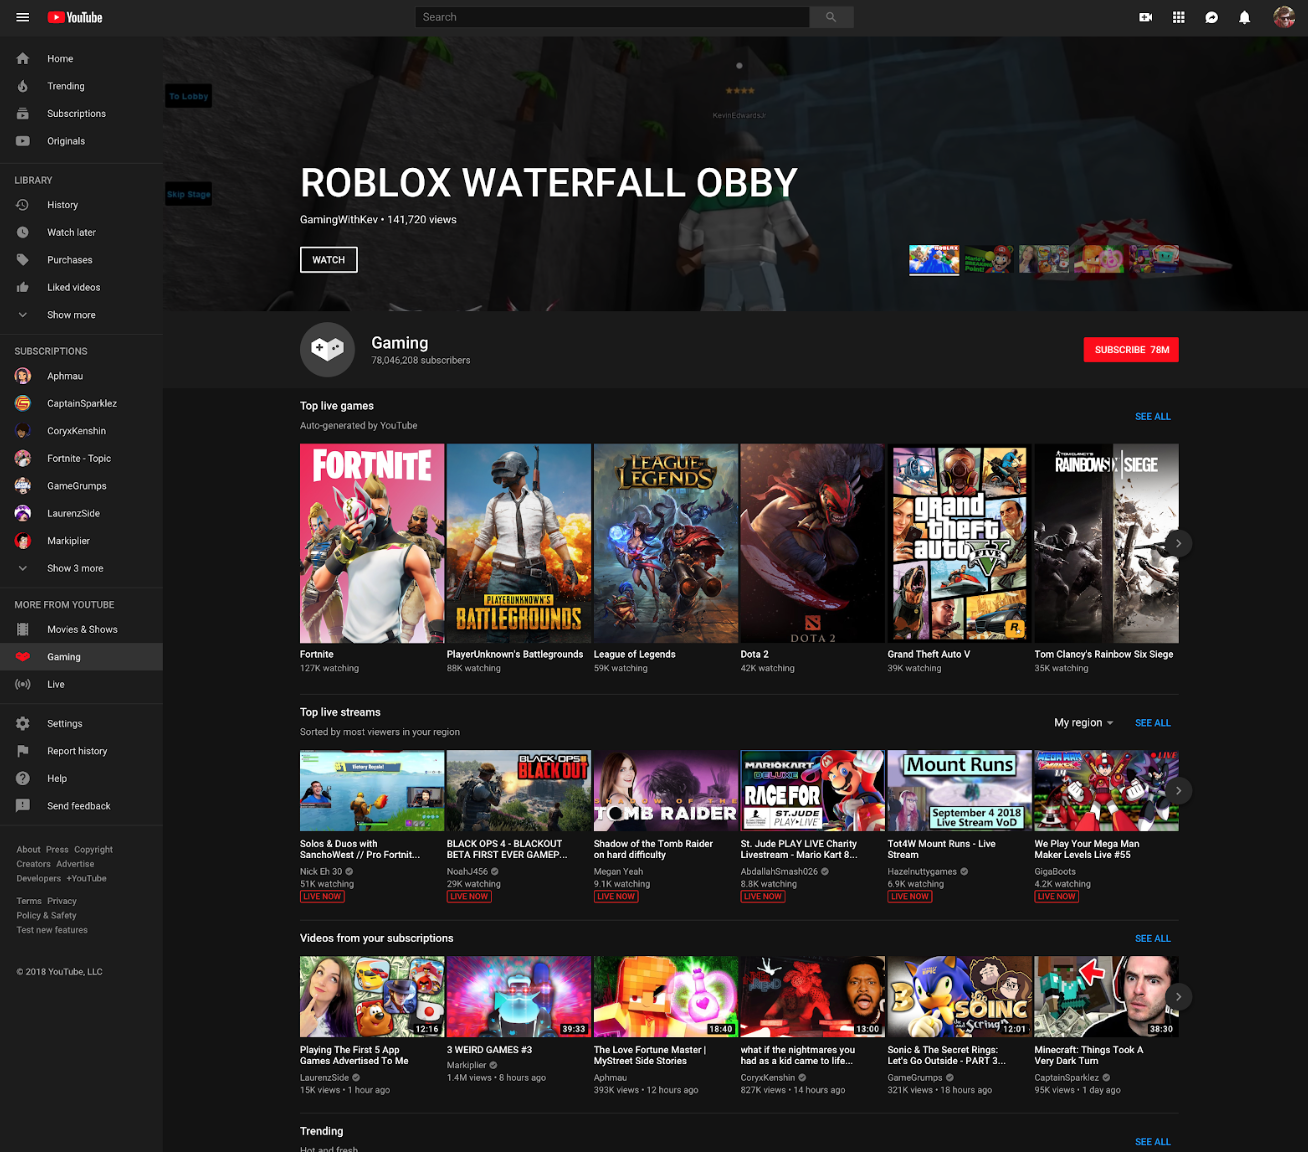 Youtube Creator Blog Gaming Gets A New Home On Youtube - is roblox shutting down youtube